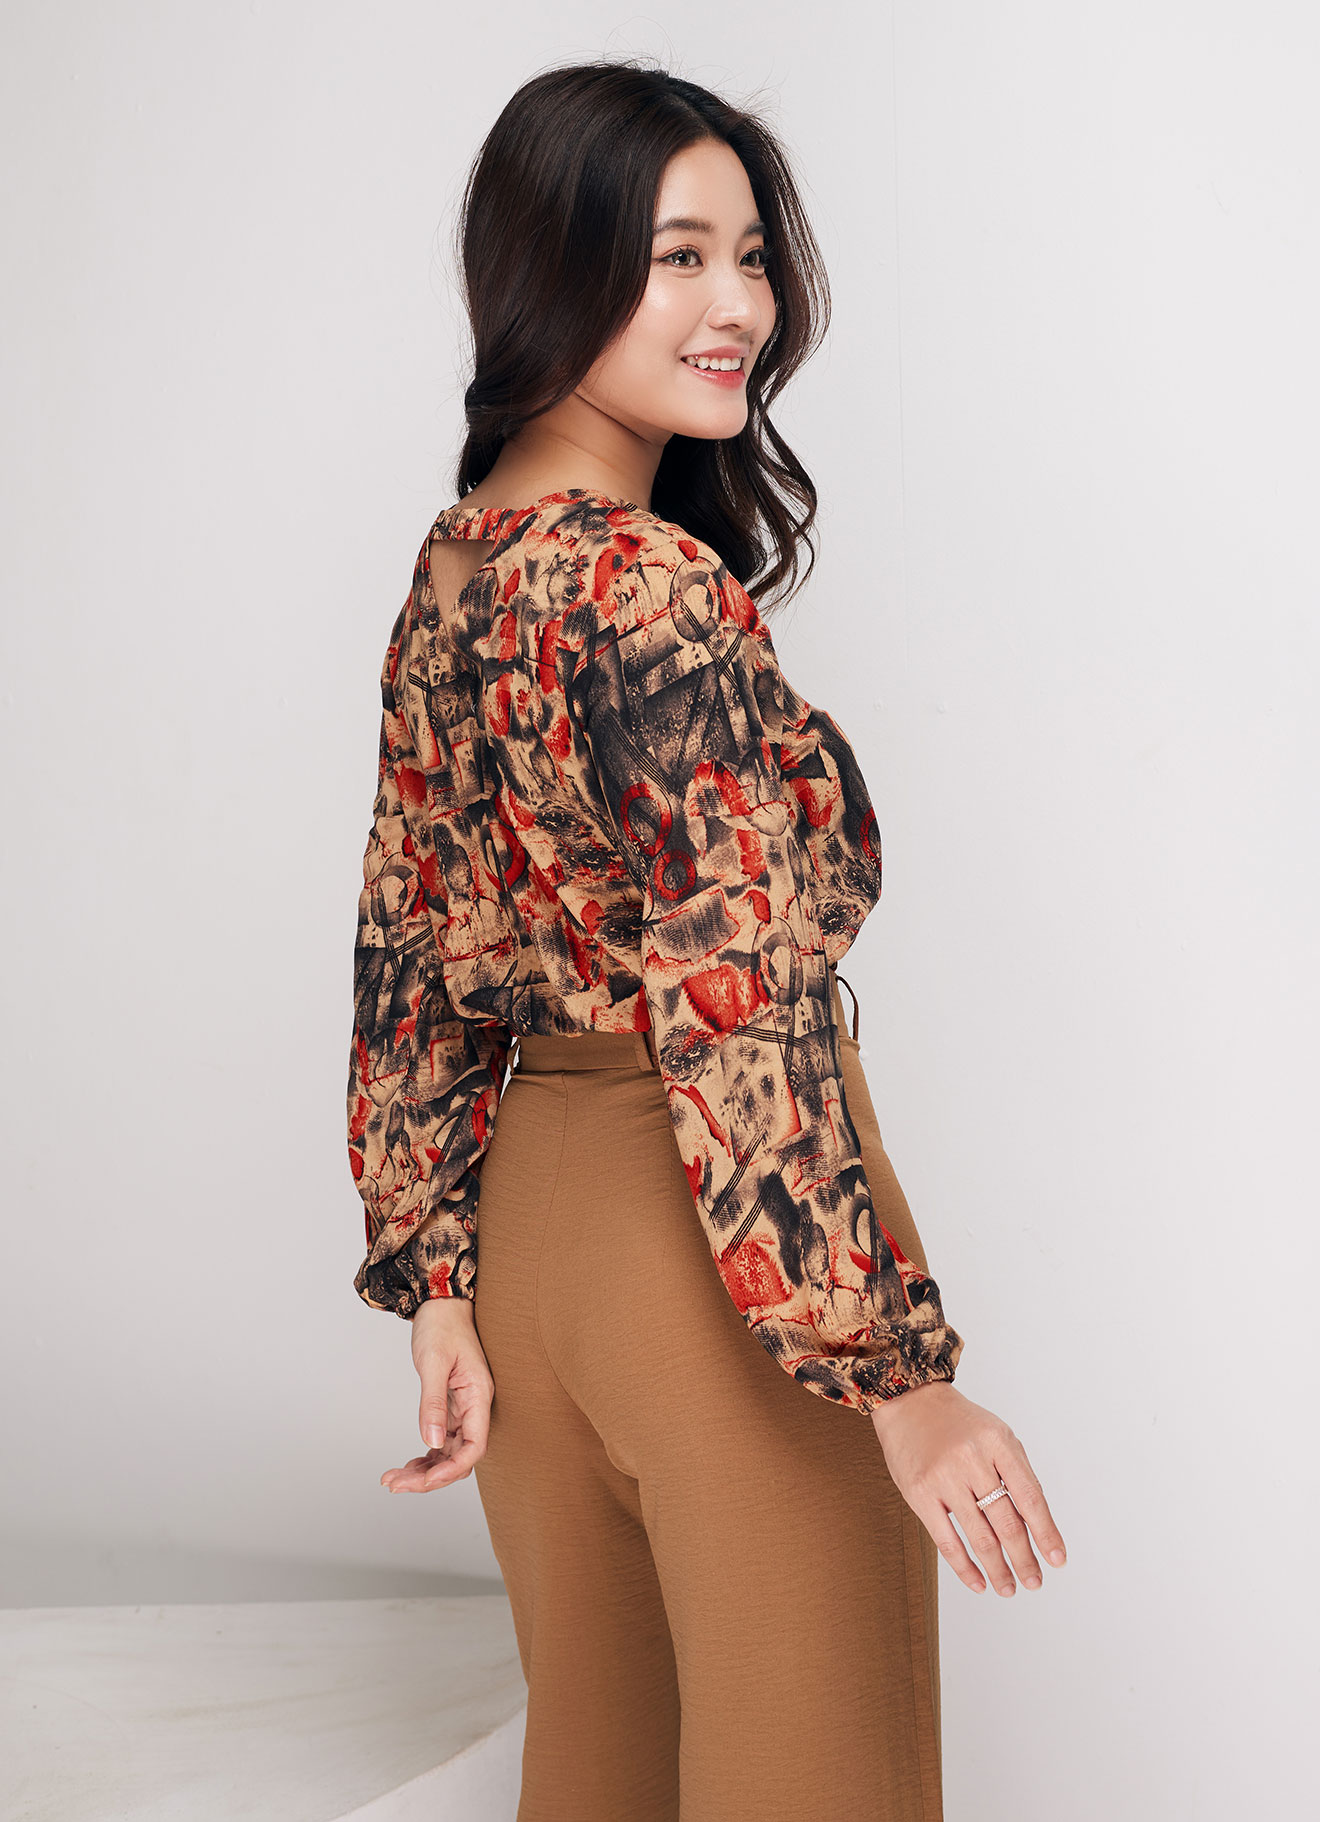 Fiery-Red by Printed Blouse